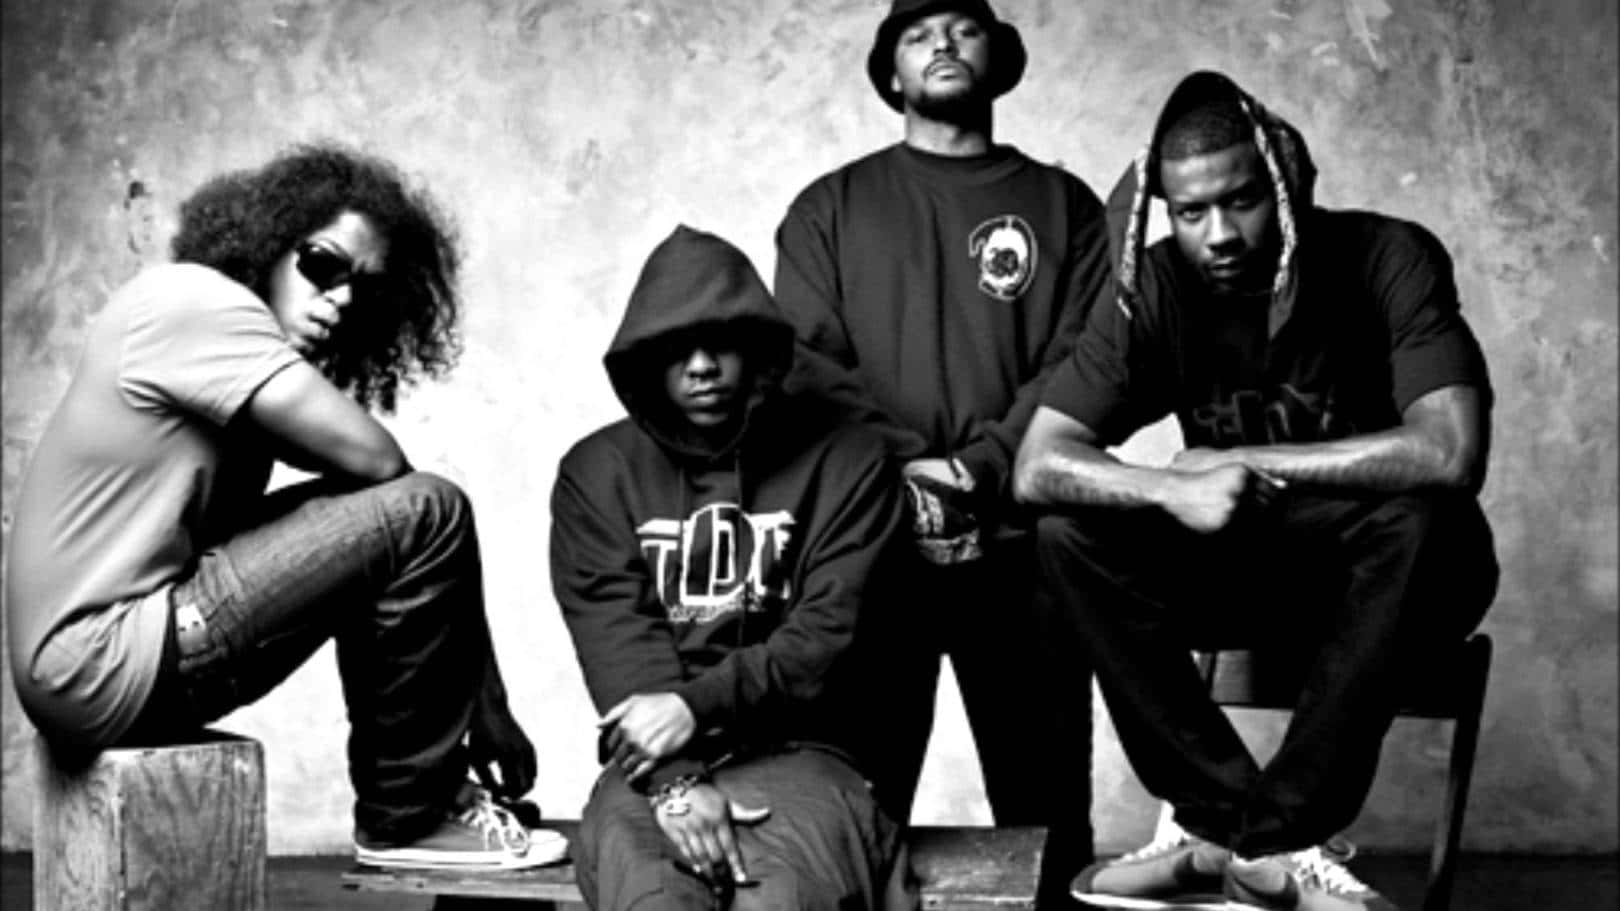 Tde - Dedication, Creativity, And Excellence Background